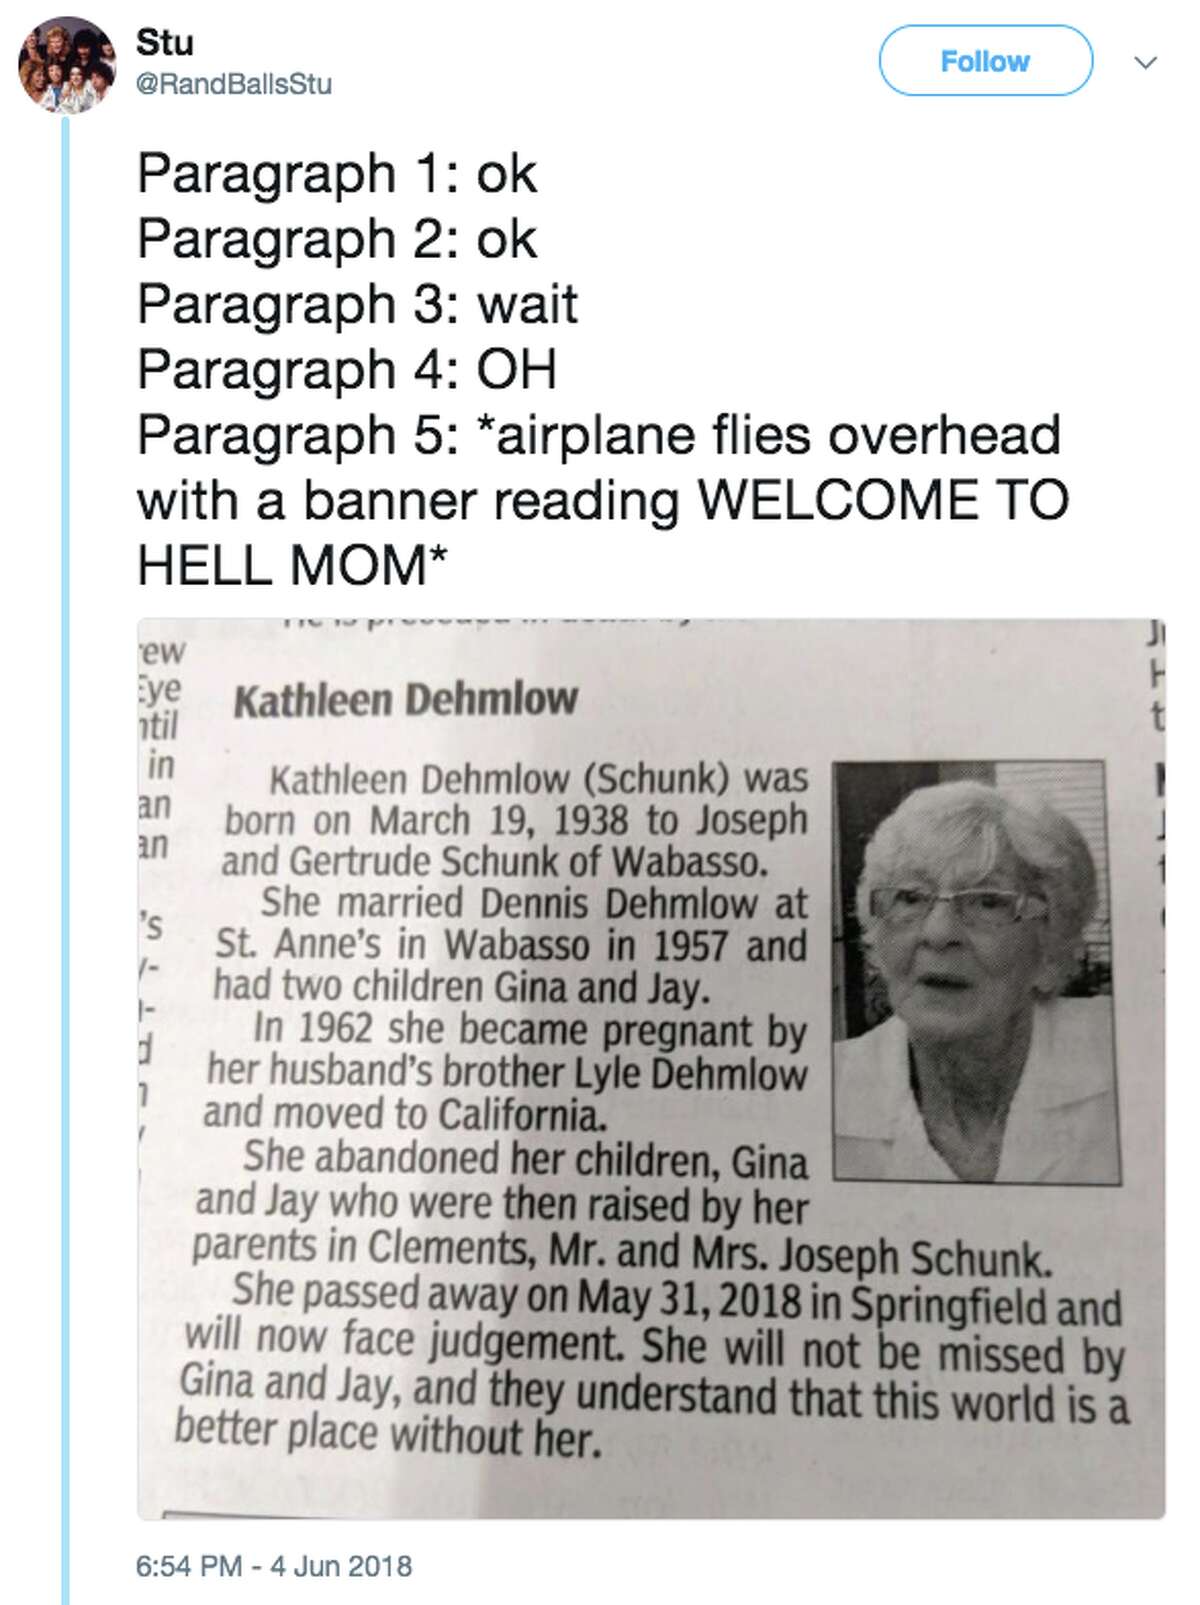 The Redwood Falls Gazette in Minnesota published an obituary on June 4 that's going viral.